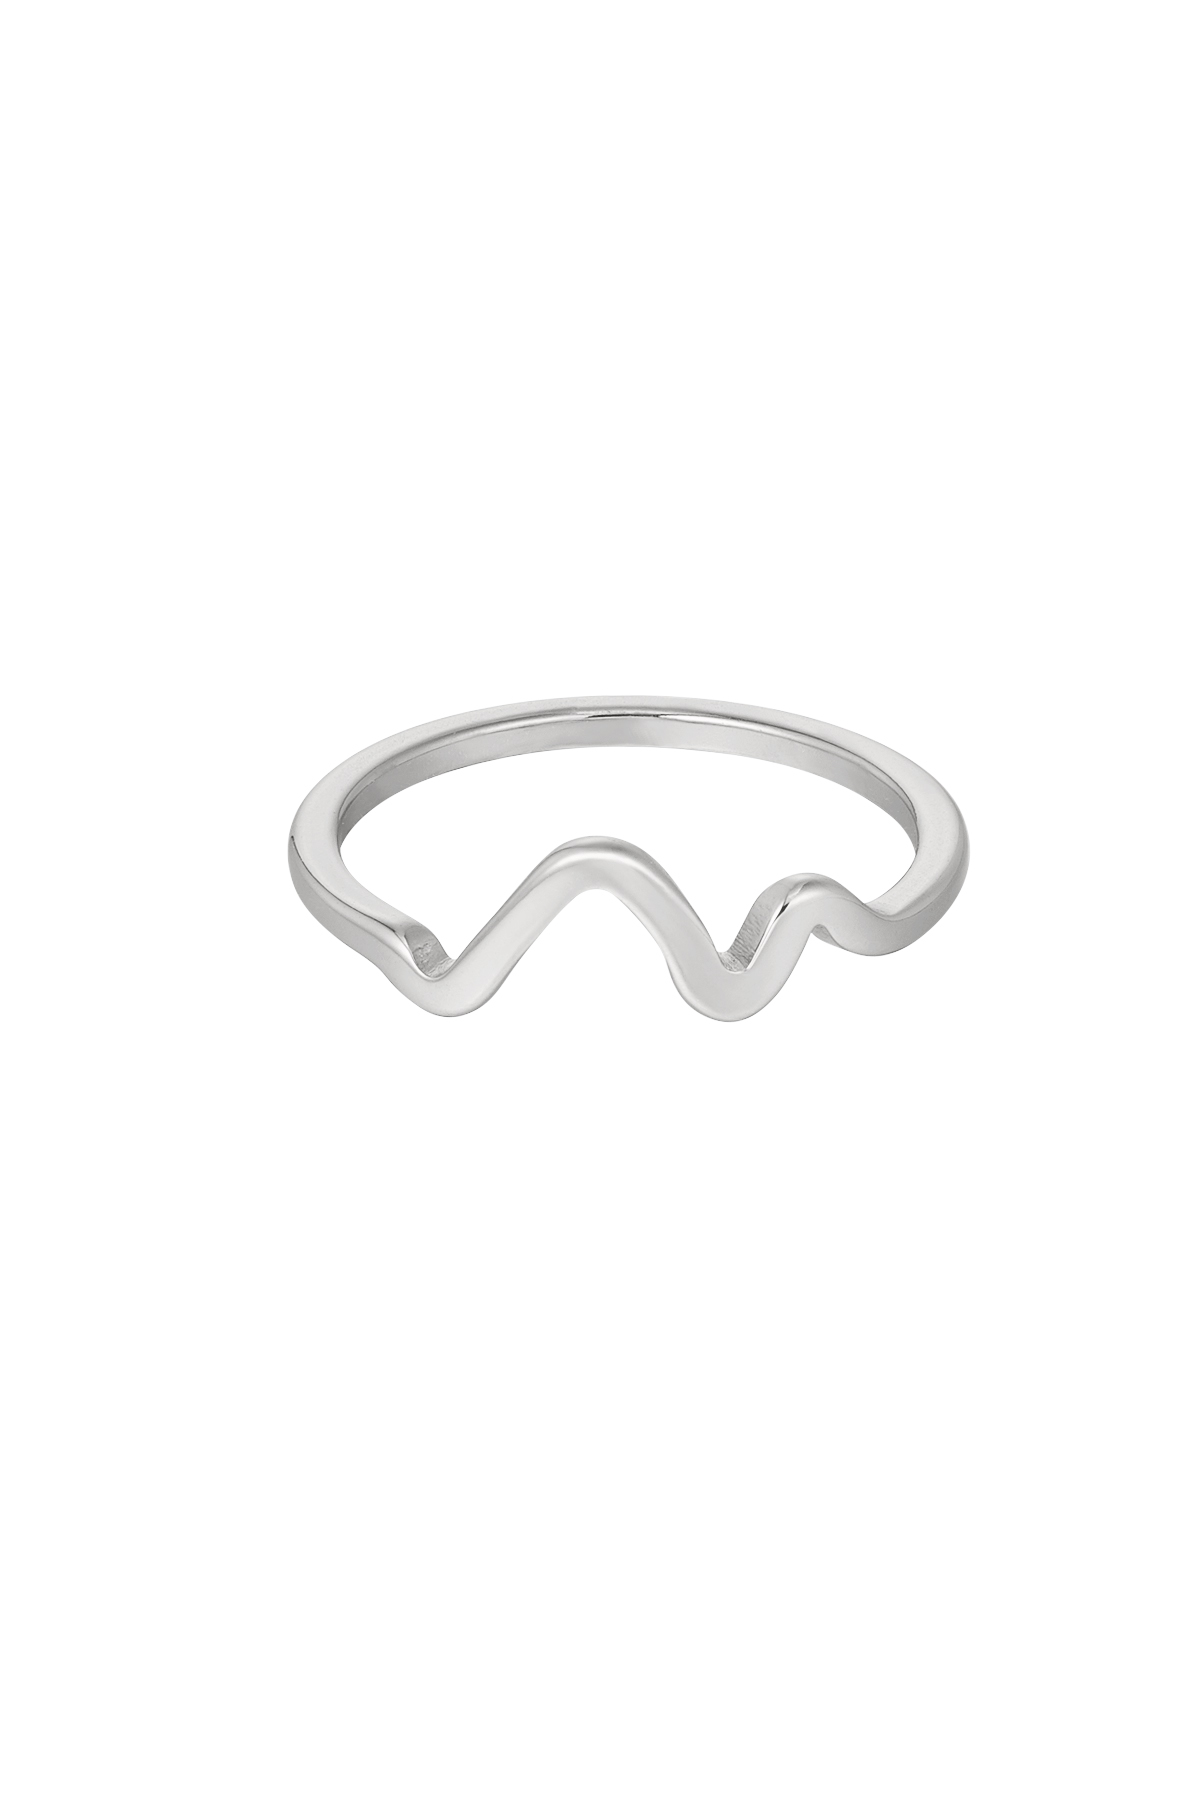 Ring with curl - silver h5 